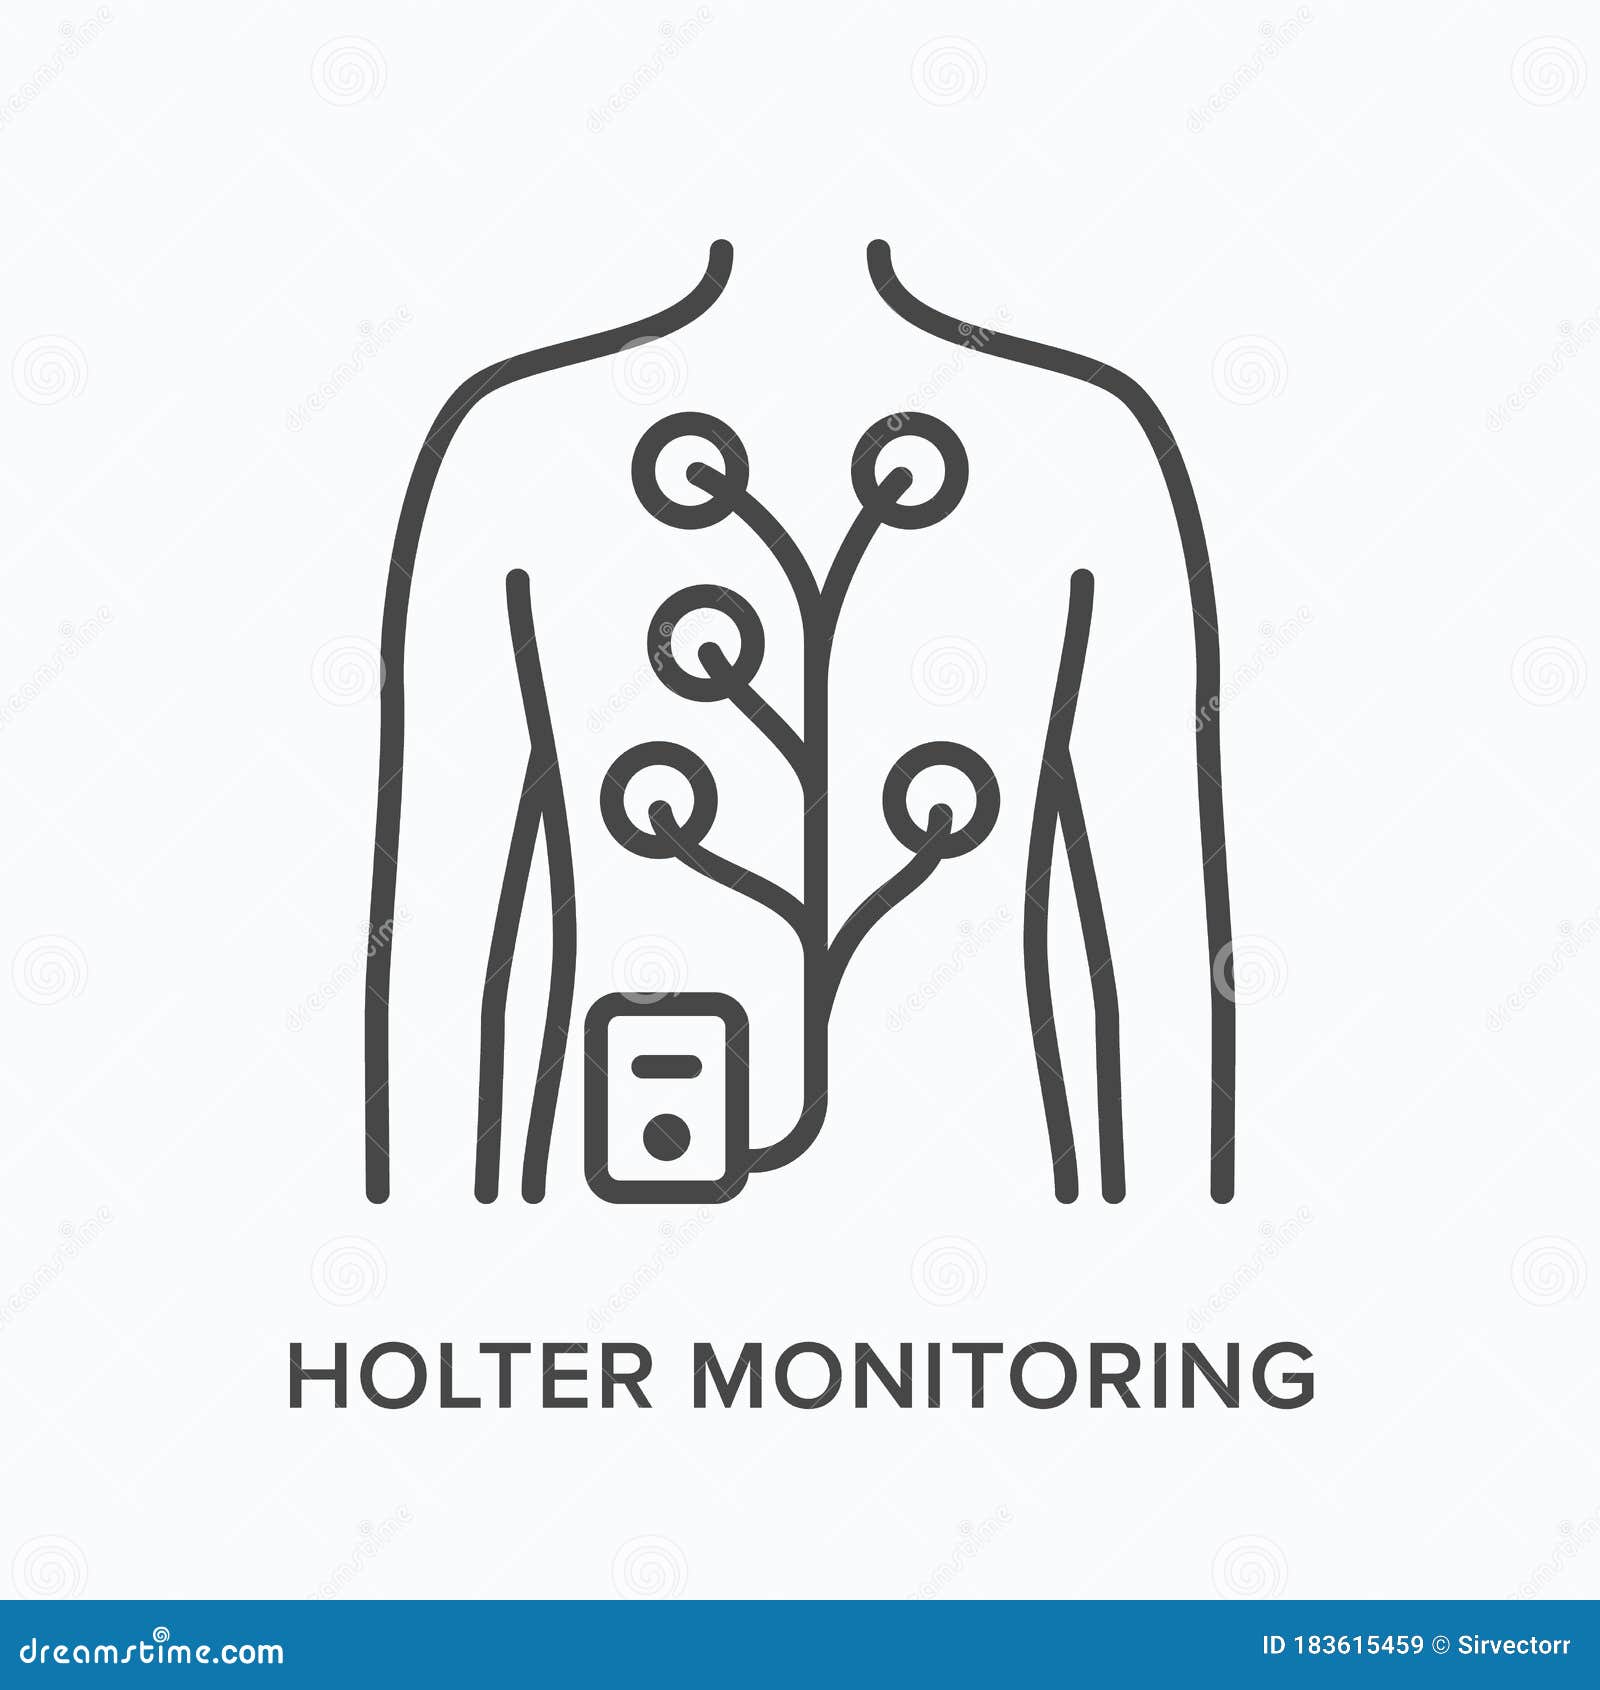 holter monitor flat line icon.  outline  of man with electrodes on body. cardiovascular, cardiology